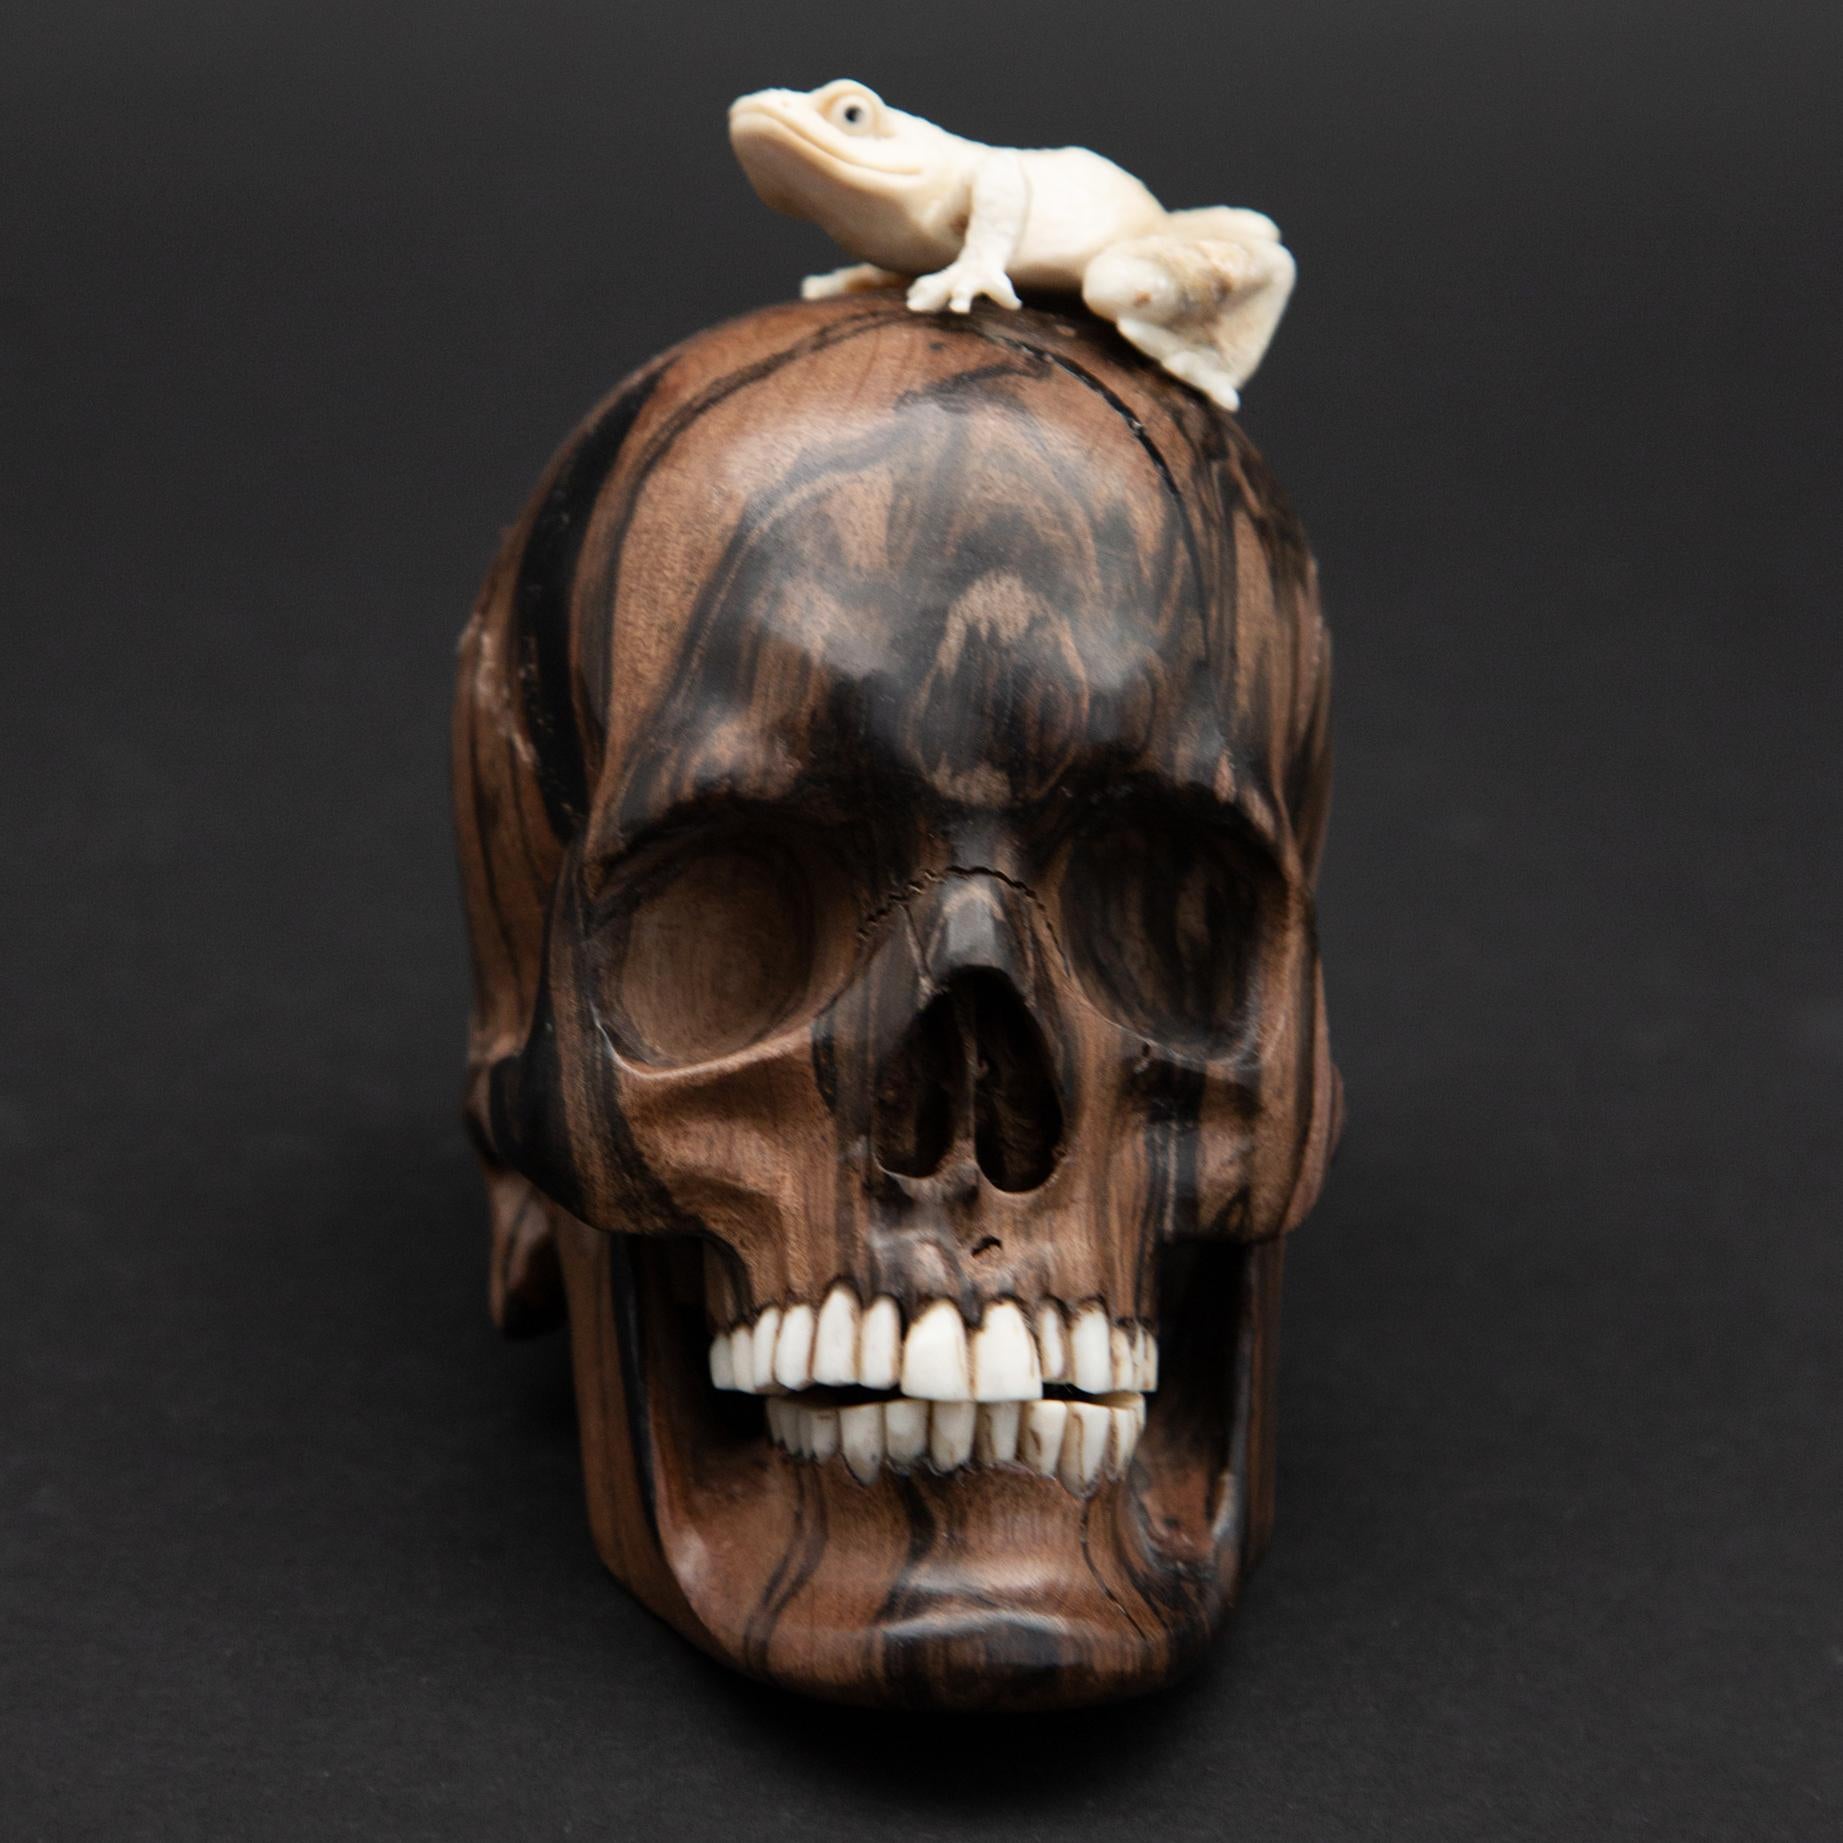 Beautifully sculpted wood skull with a carved moose antler frog. Meticulously created by skilled Indonesian artists, this is a one of a kind piece.